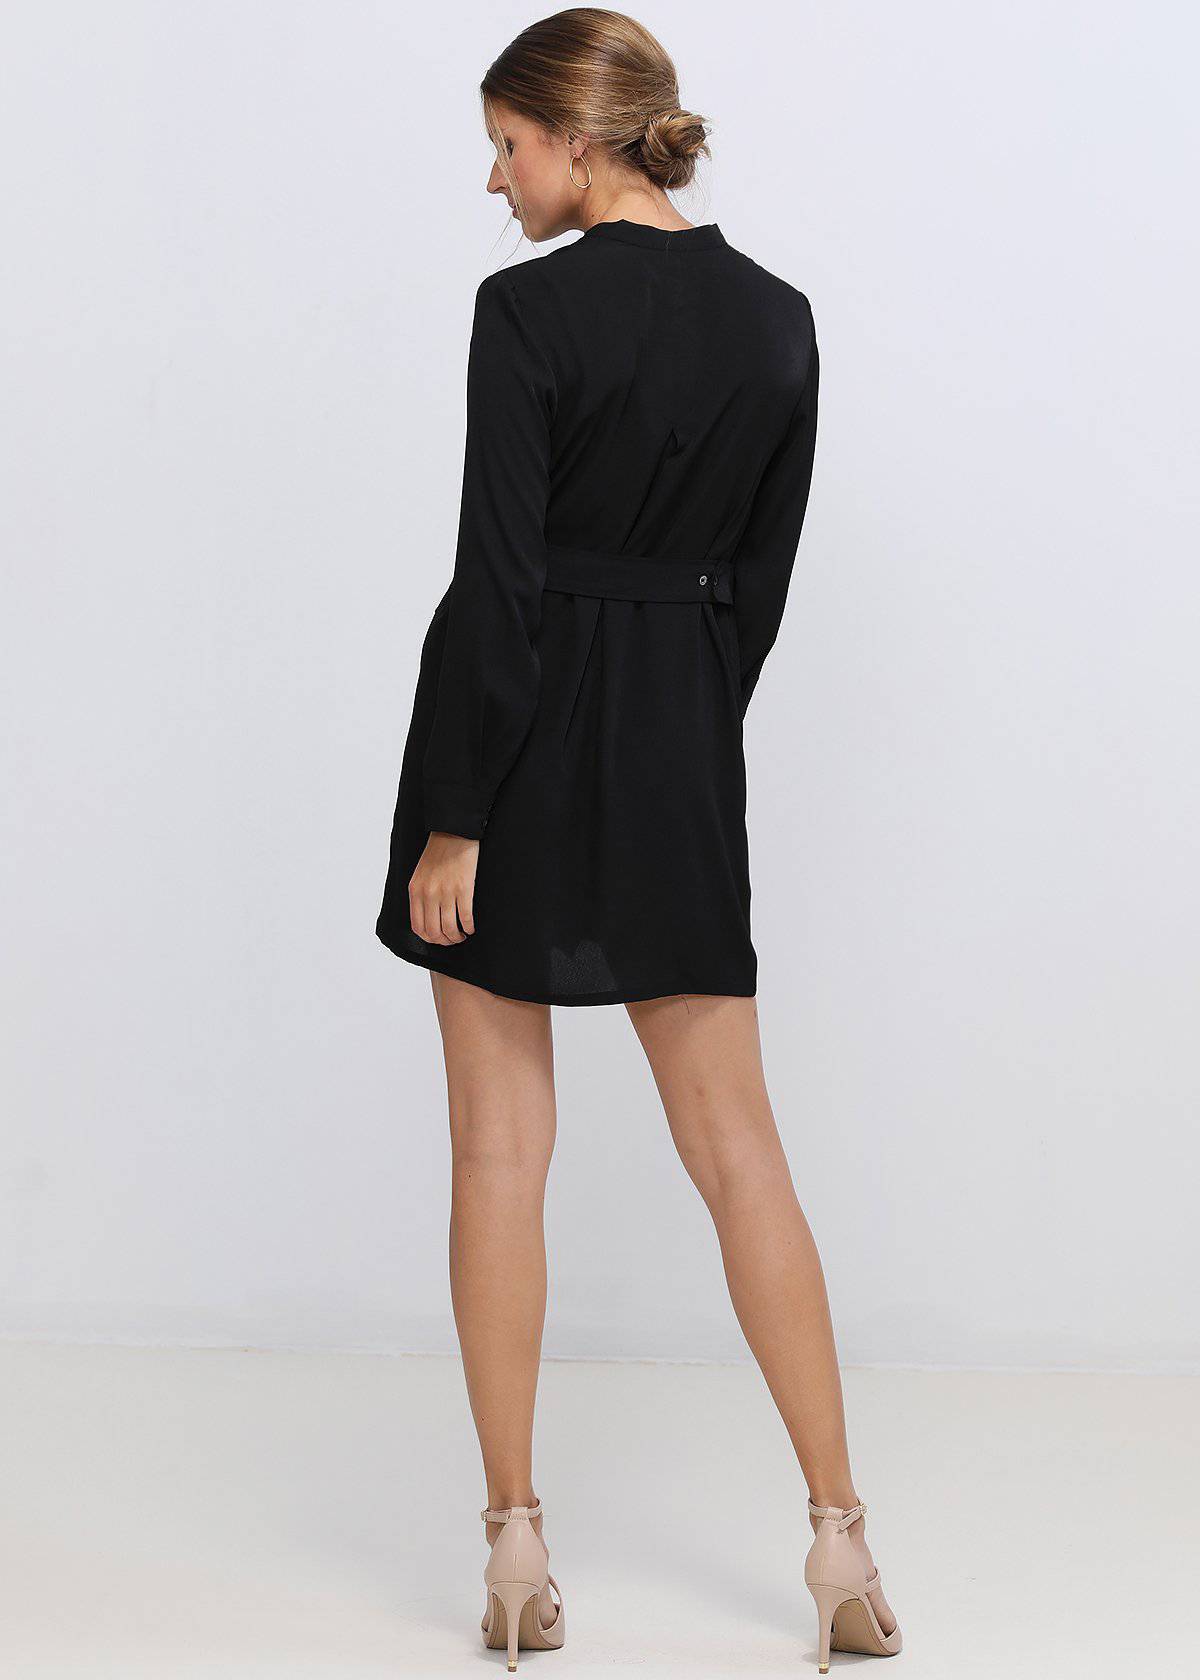 Women's Stand Collar Wrap Dress In Black by Shop at Konus